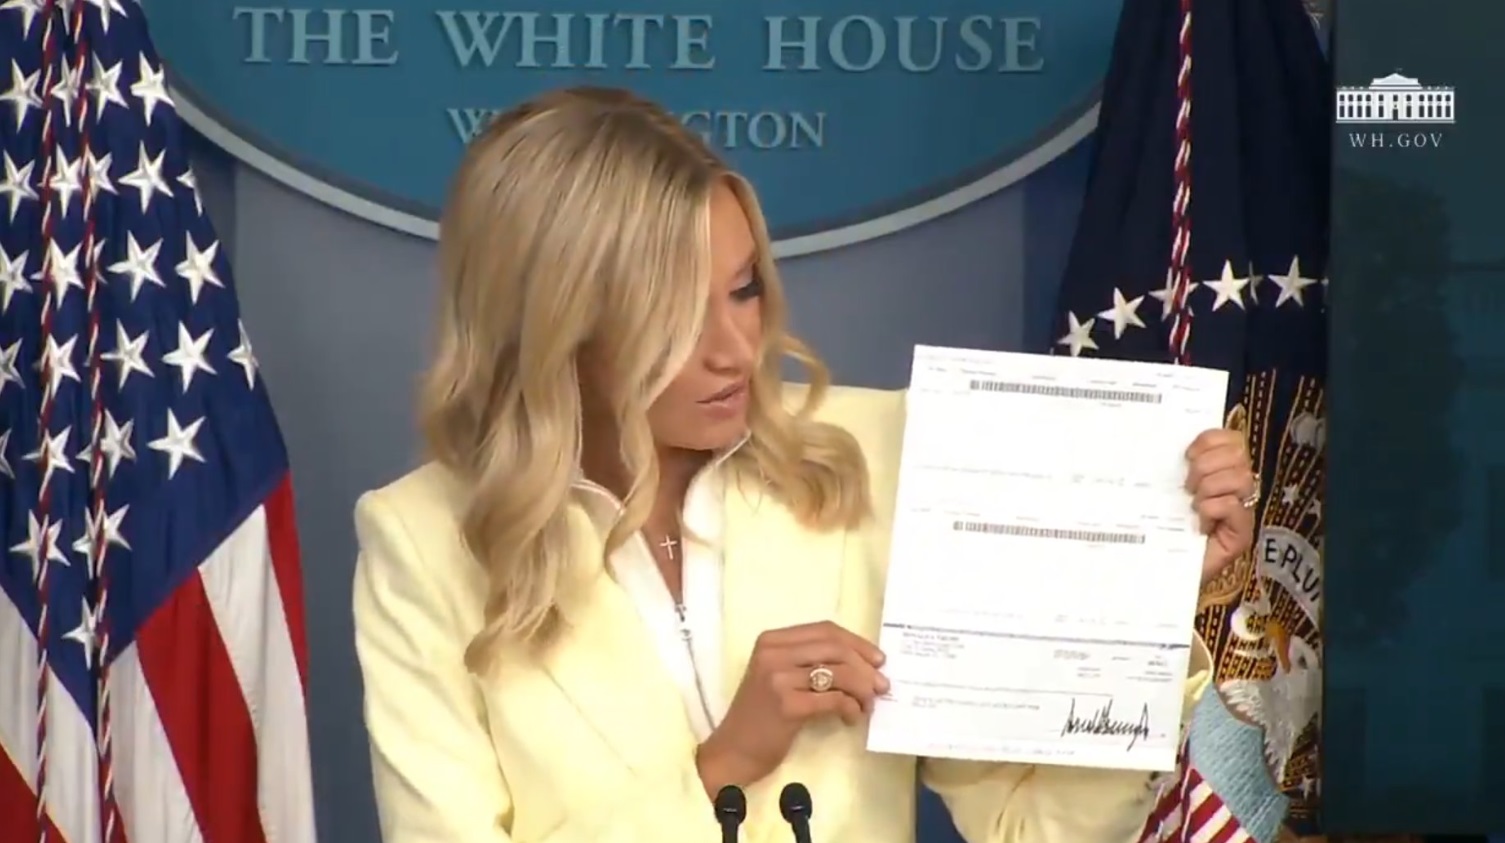 PHOTO Kayleigh McEnany Holding A Donation Check From Donald Trump's Salary